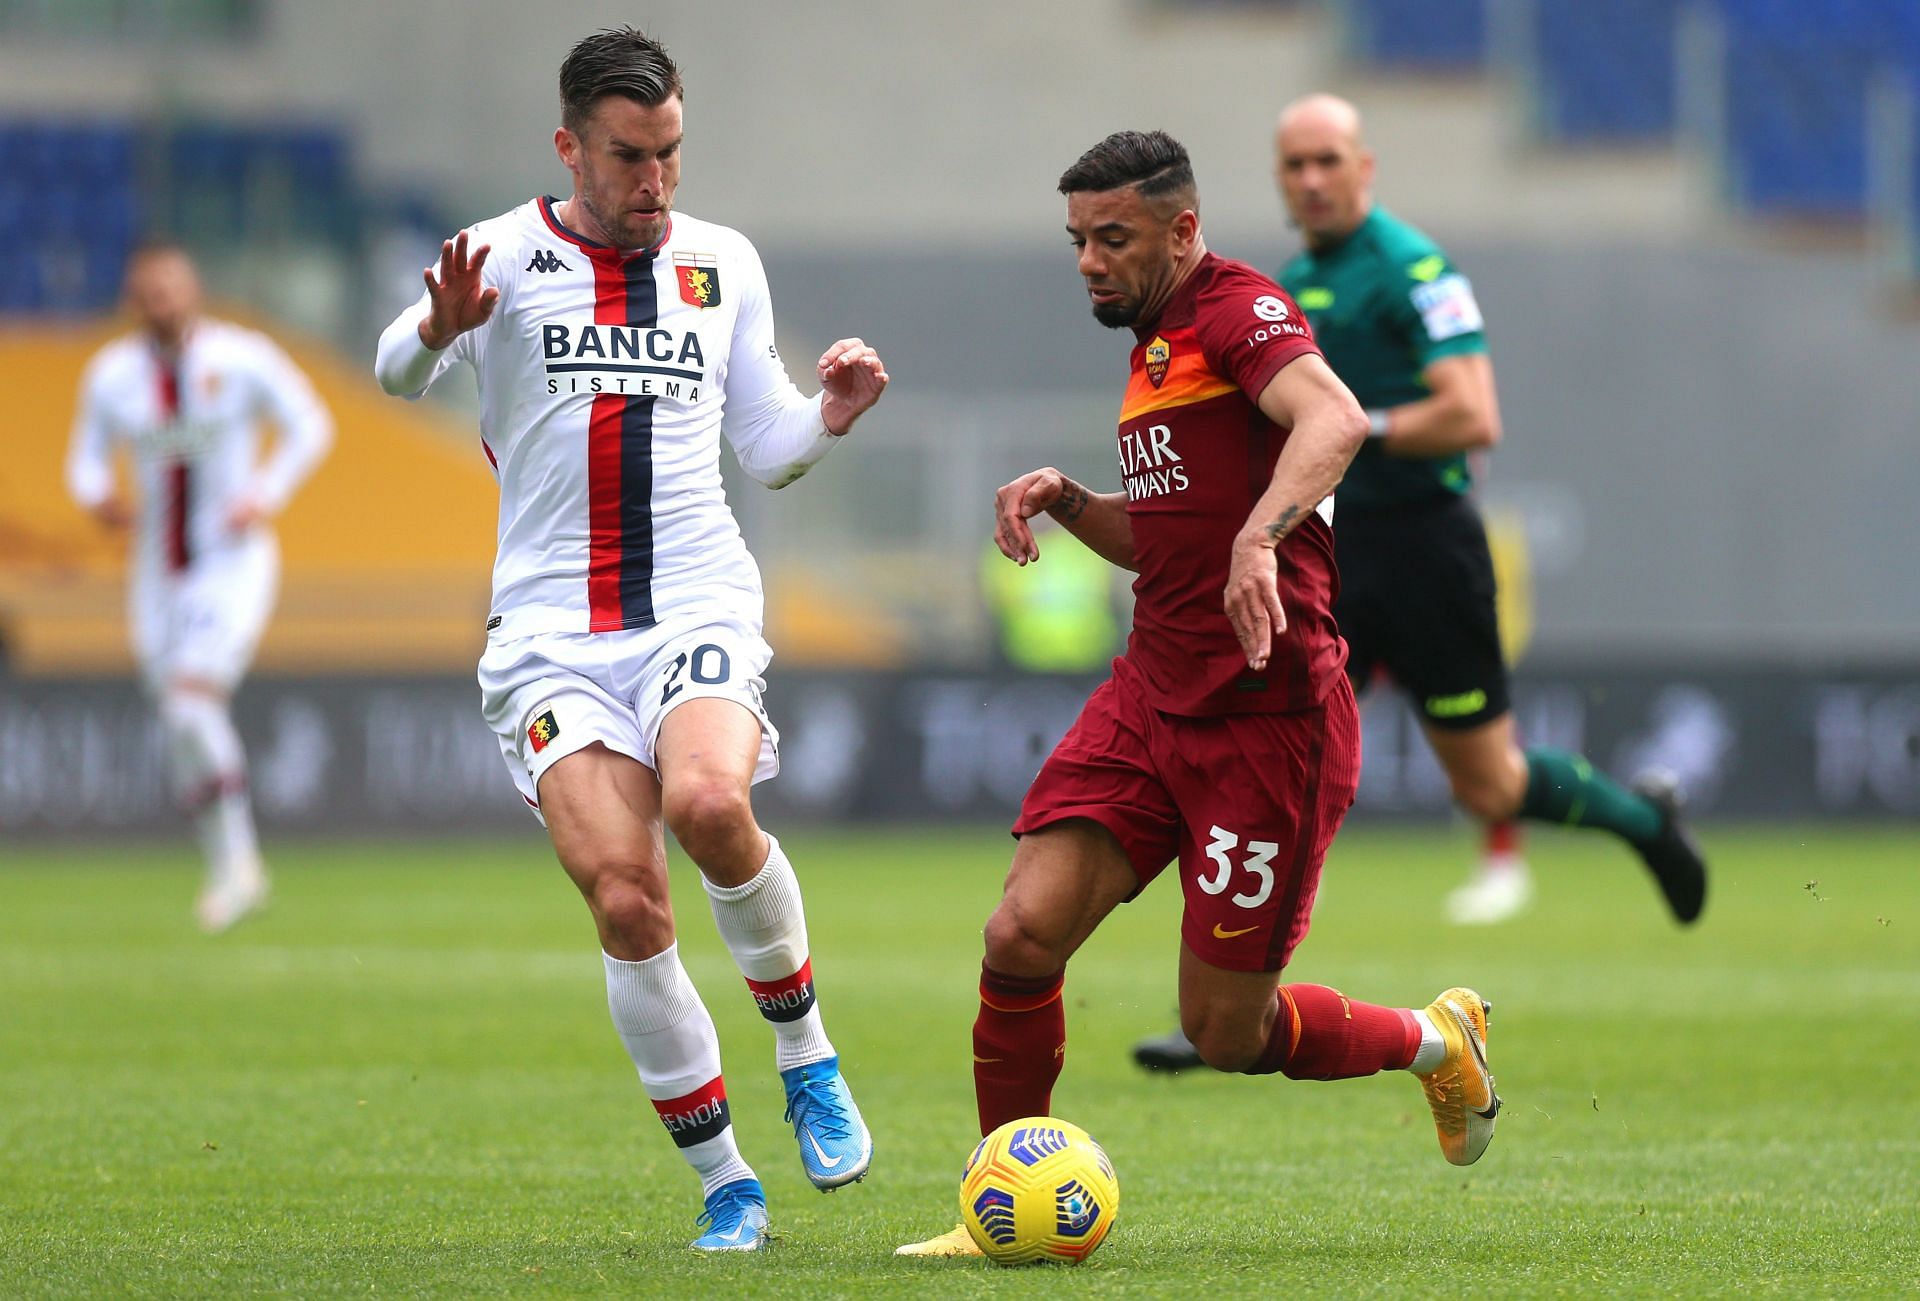 AS Roma are 15 matches unbeaten against Genoa